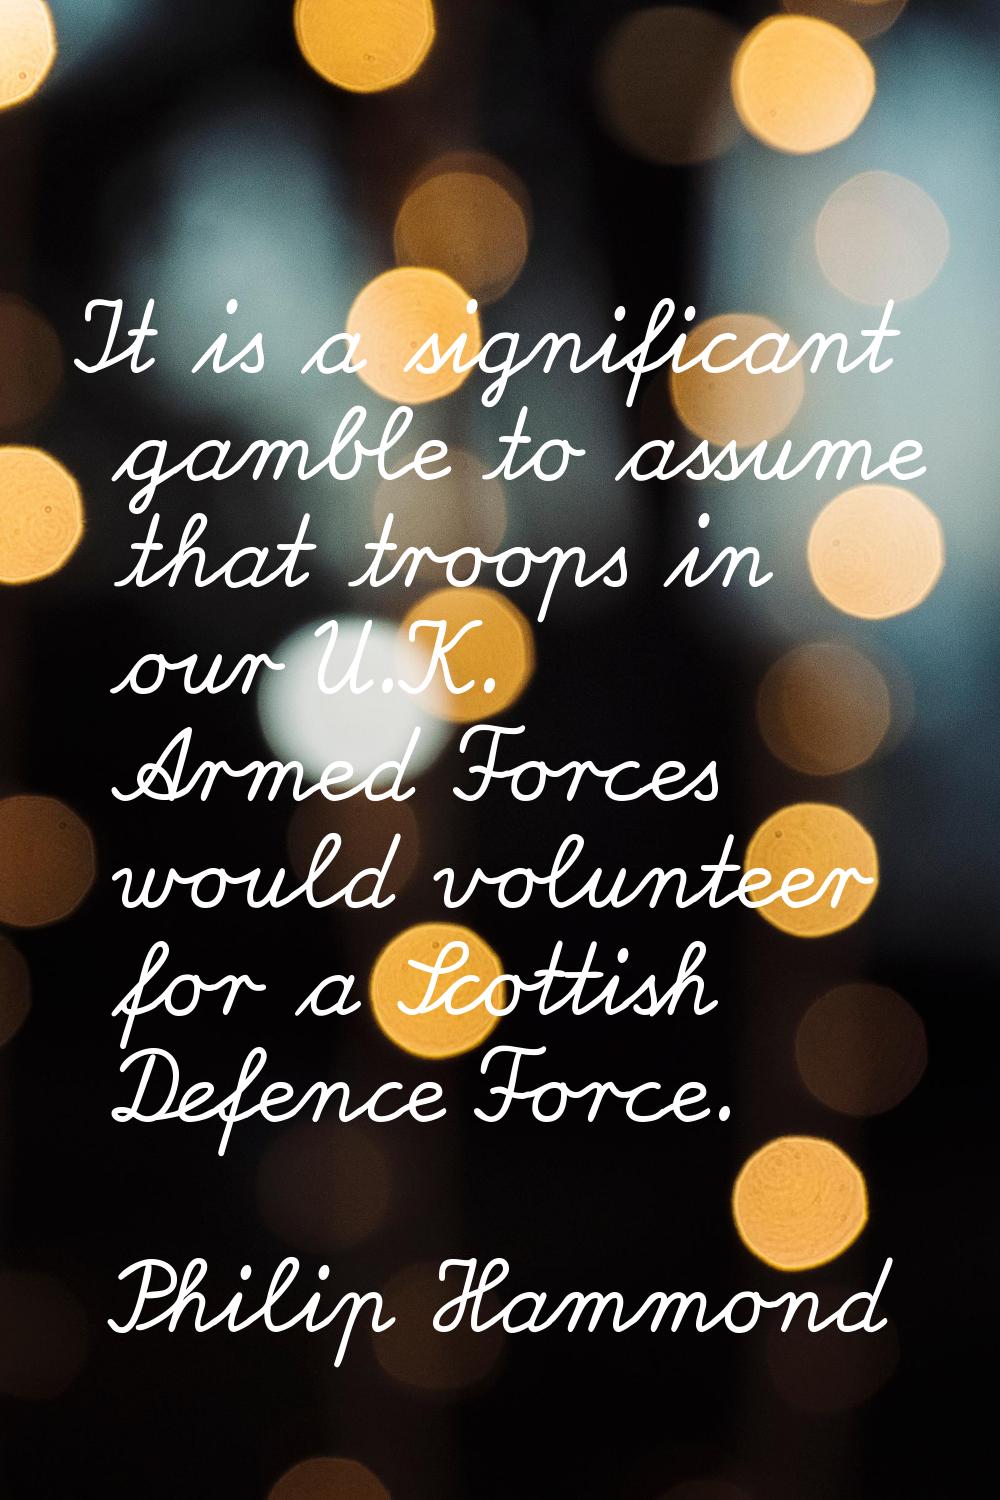 It is a significant gamble to assume that troops in our U.K. Armed Forces would volunteer for a Sco